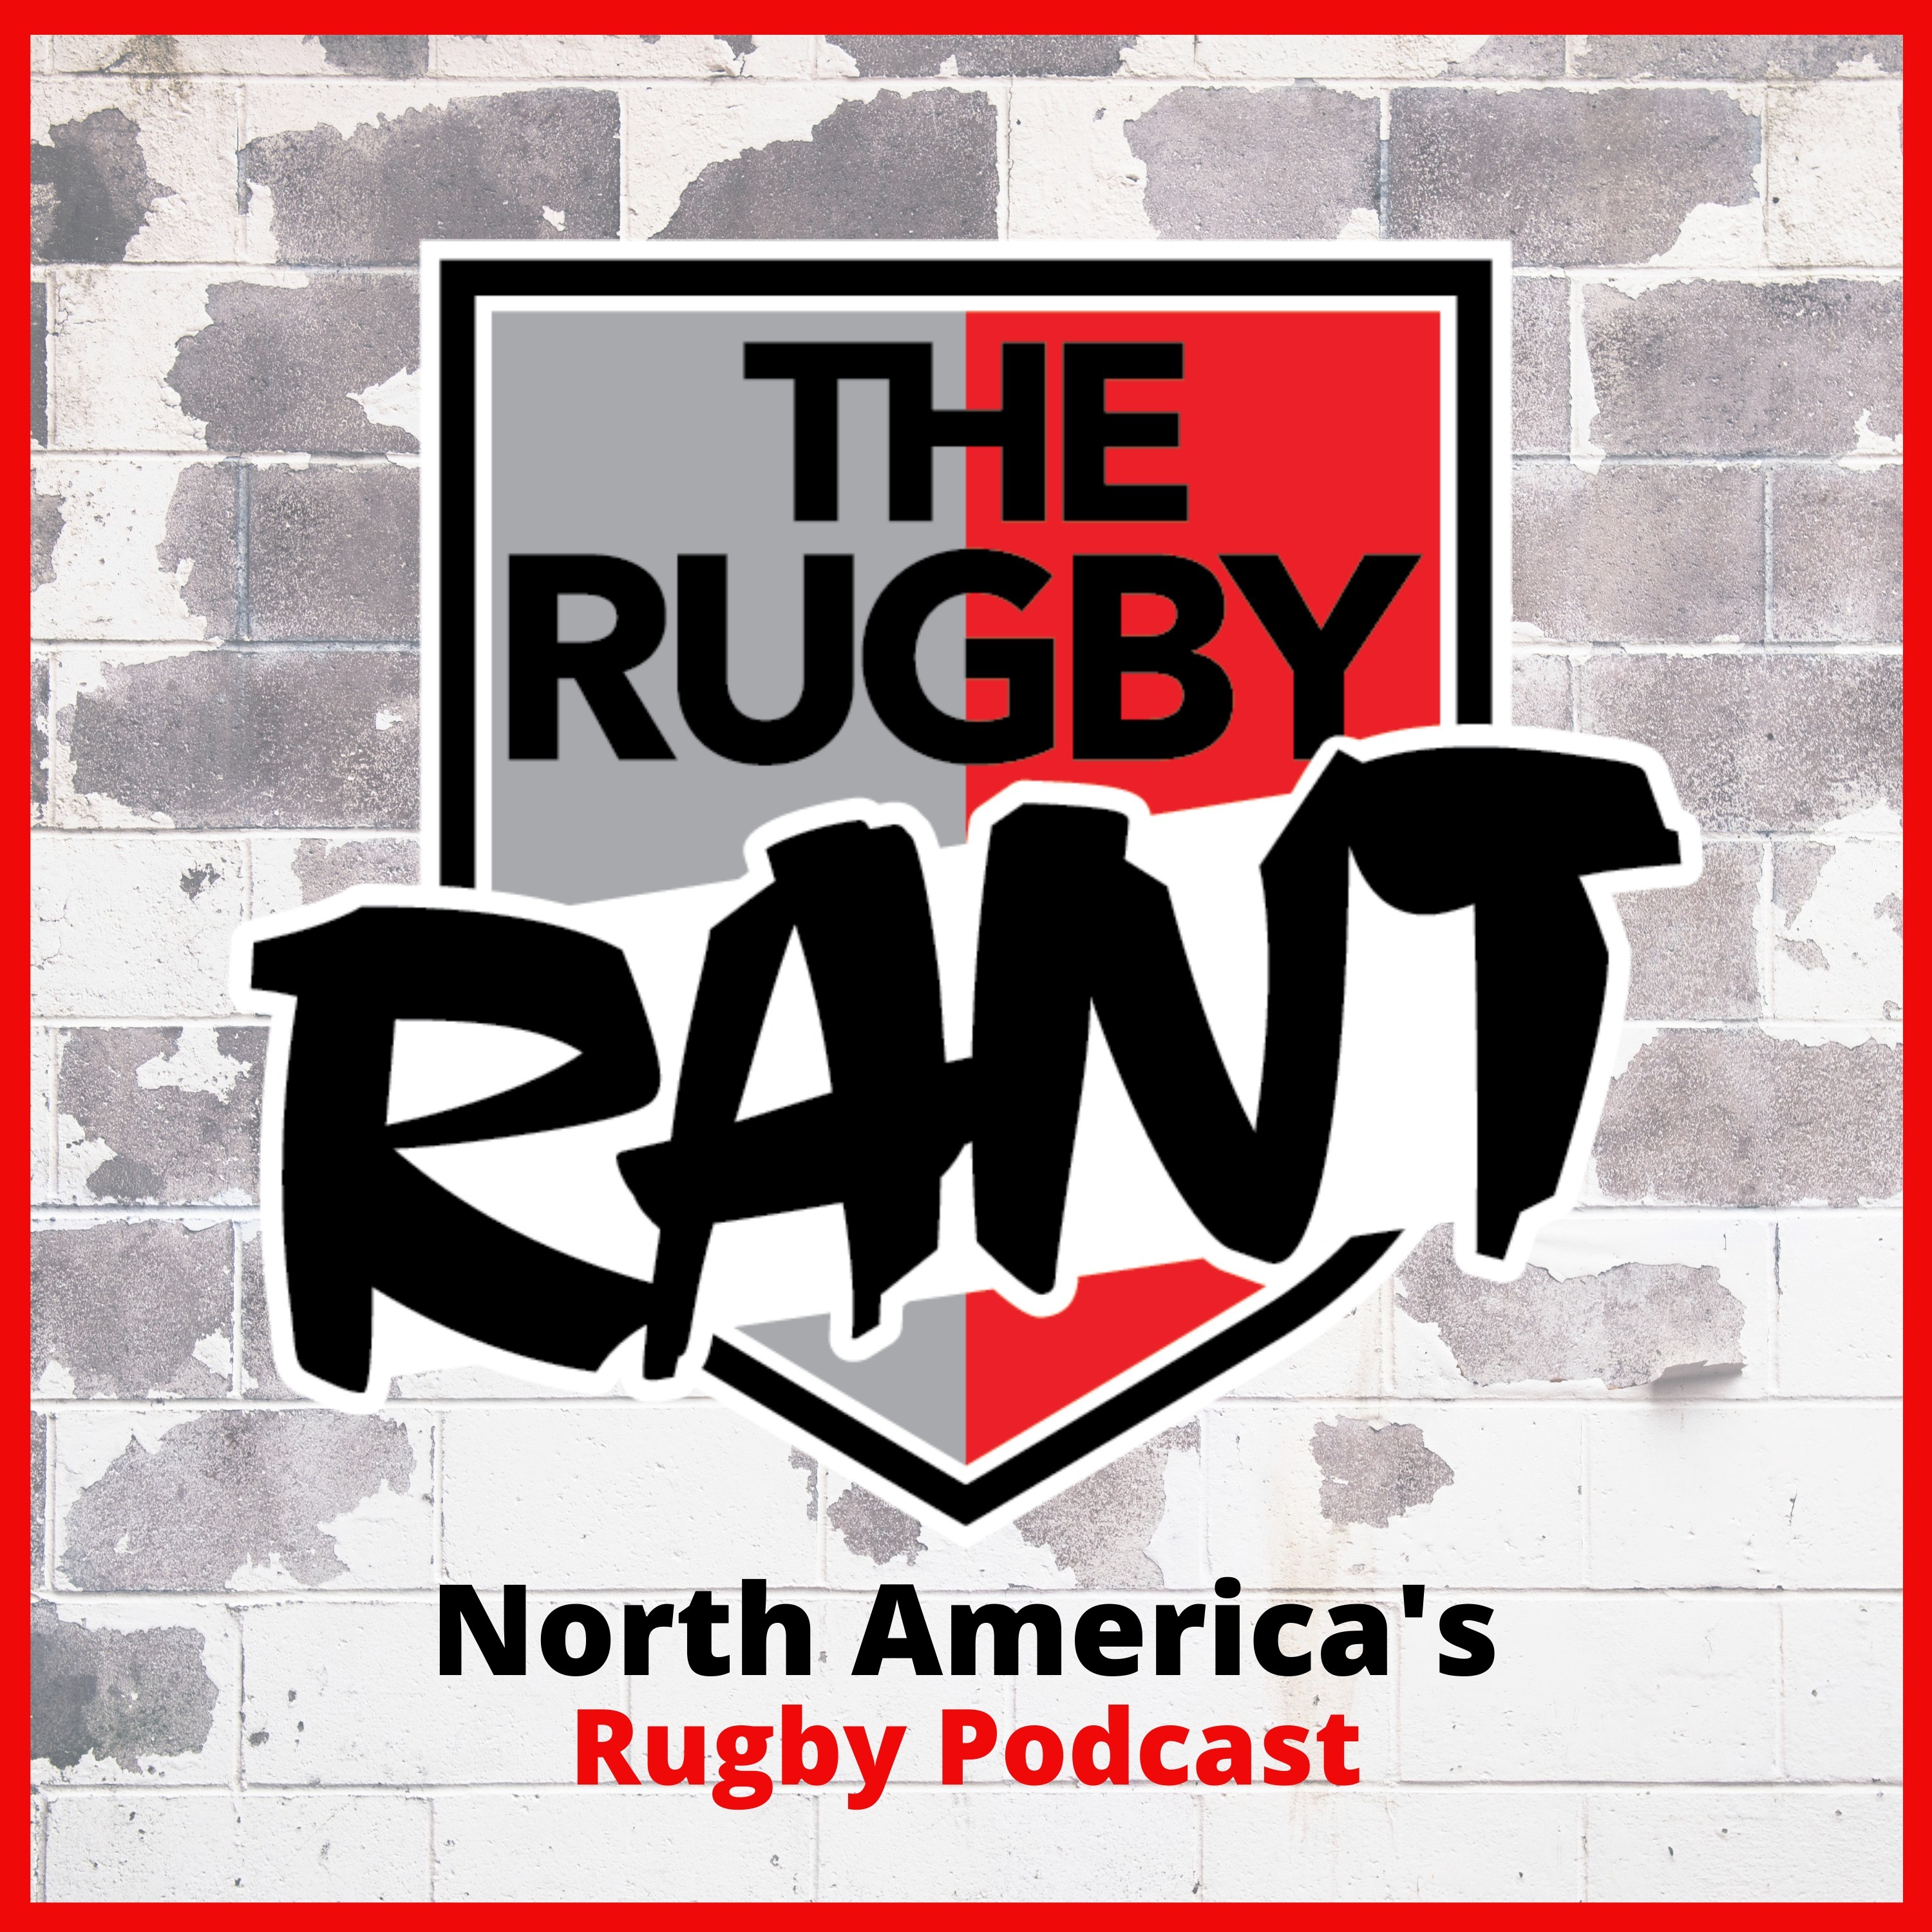 The Rugby Rant - Run, Pass or Kick with Stan South